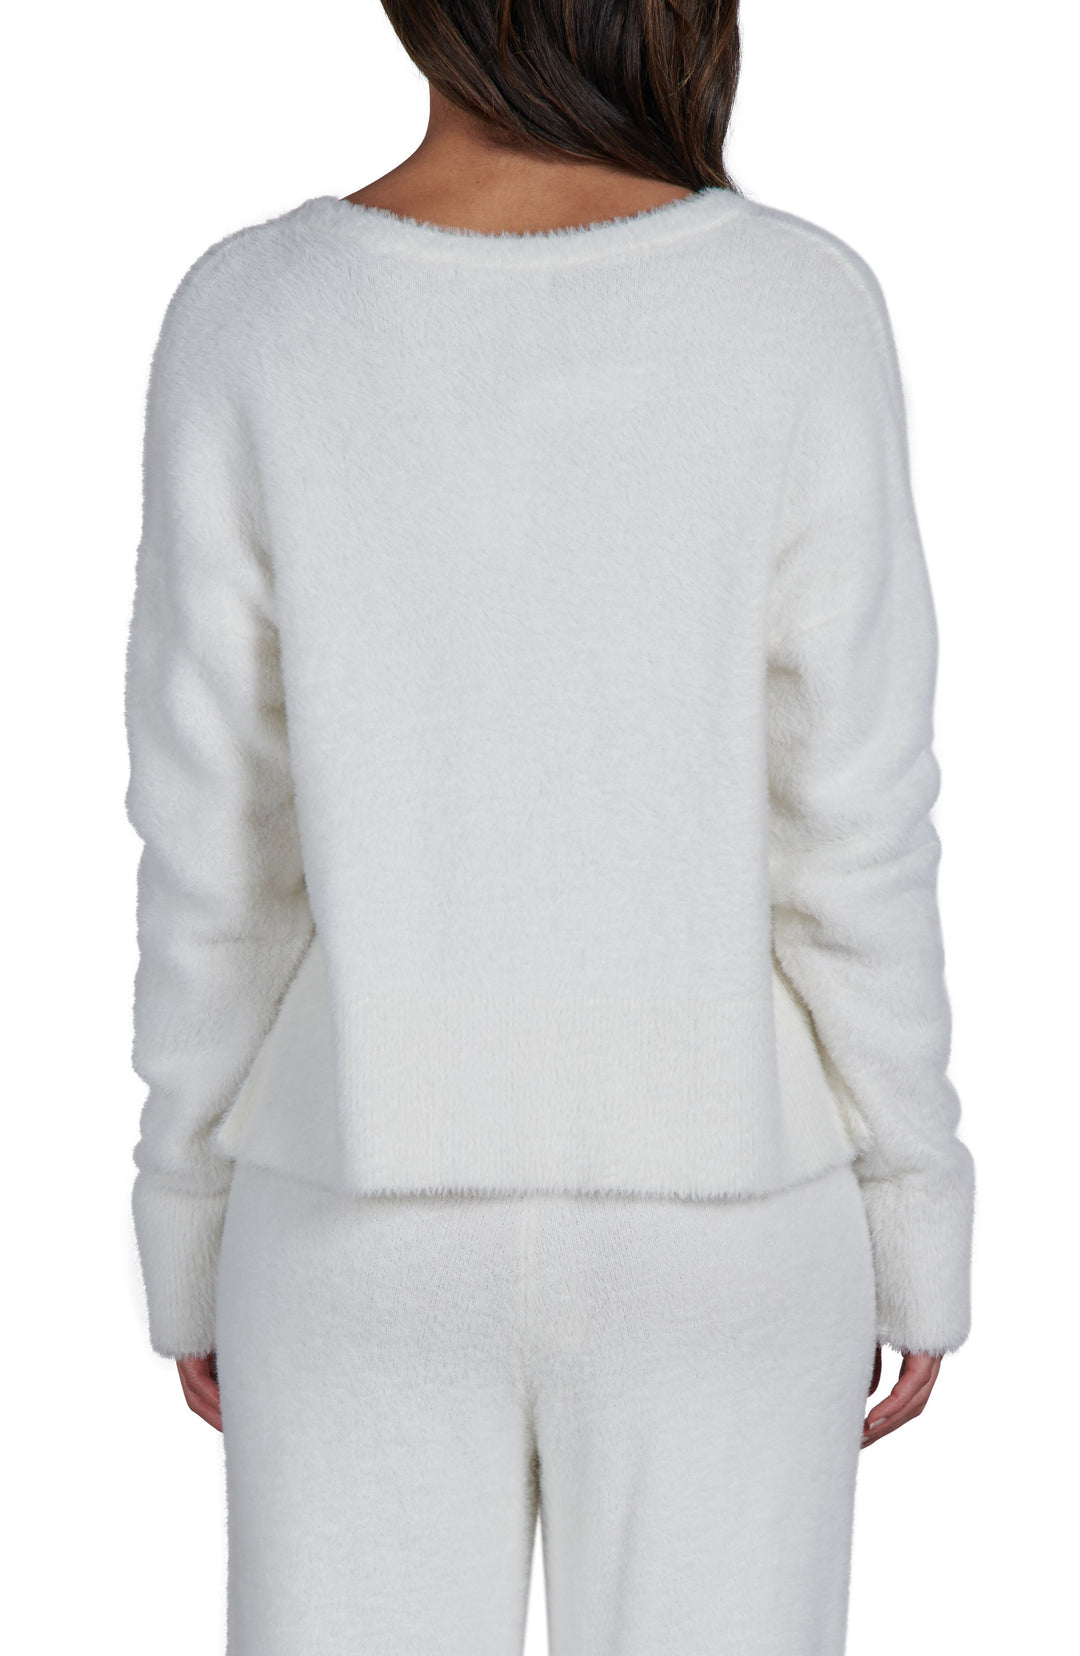 SLOW DOWN SWEATER-MILK - Kingfisher Road - Online Boutique